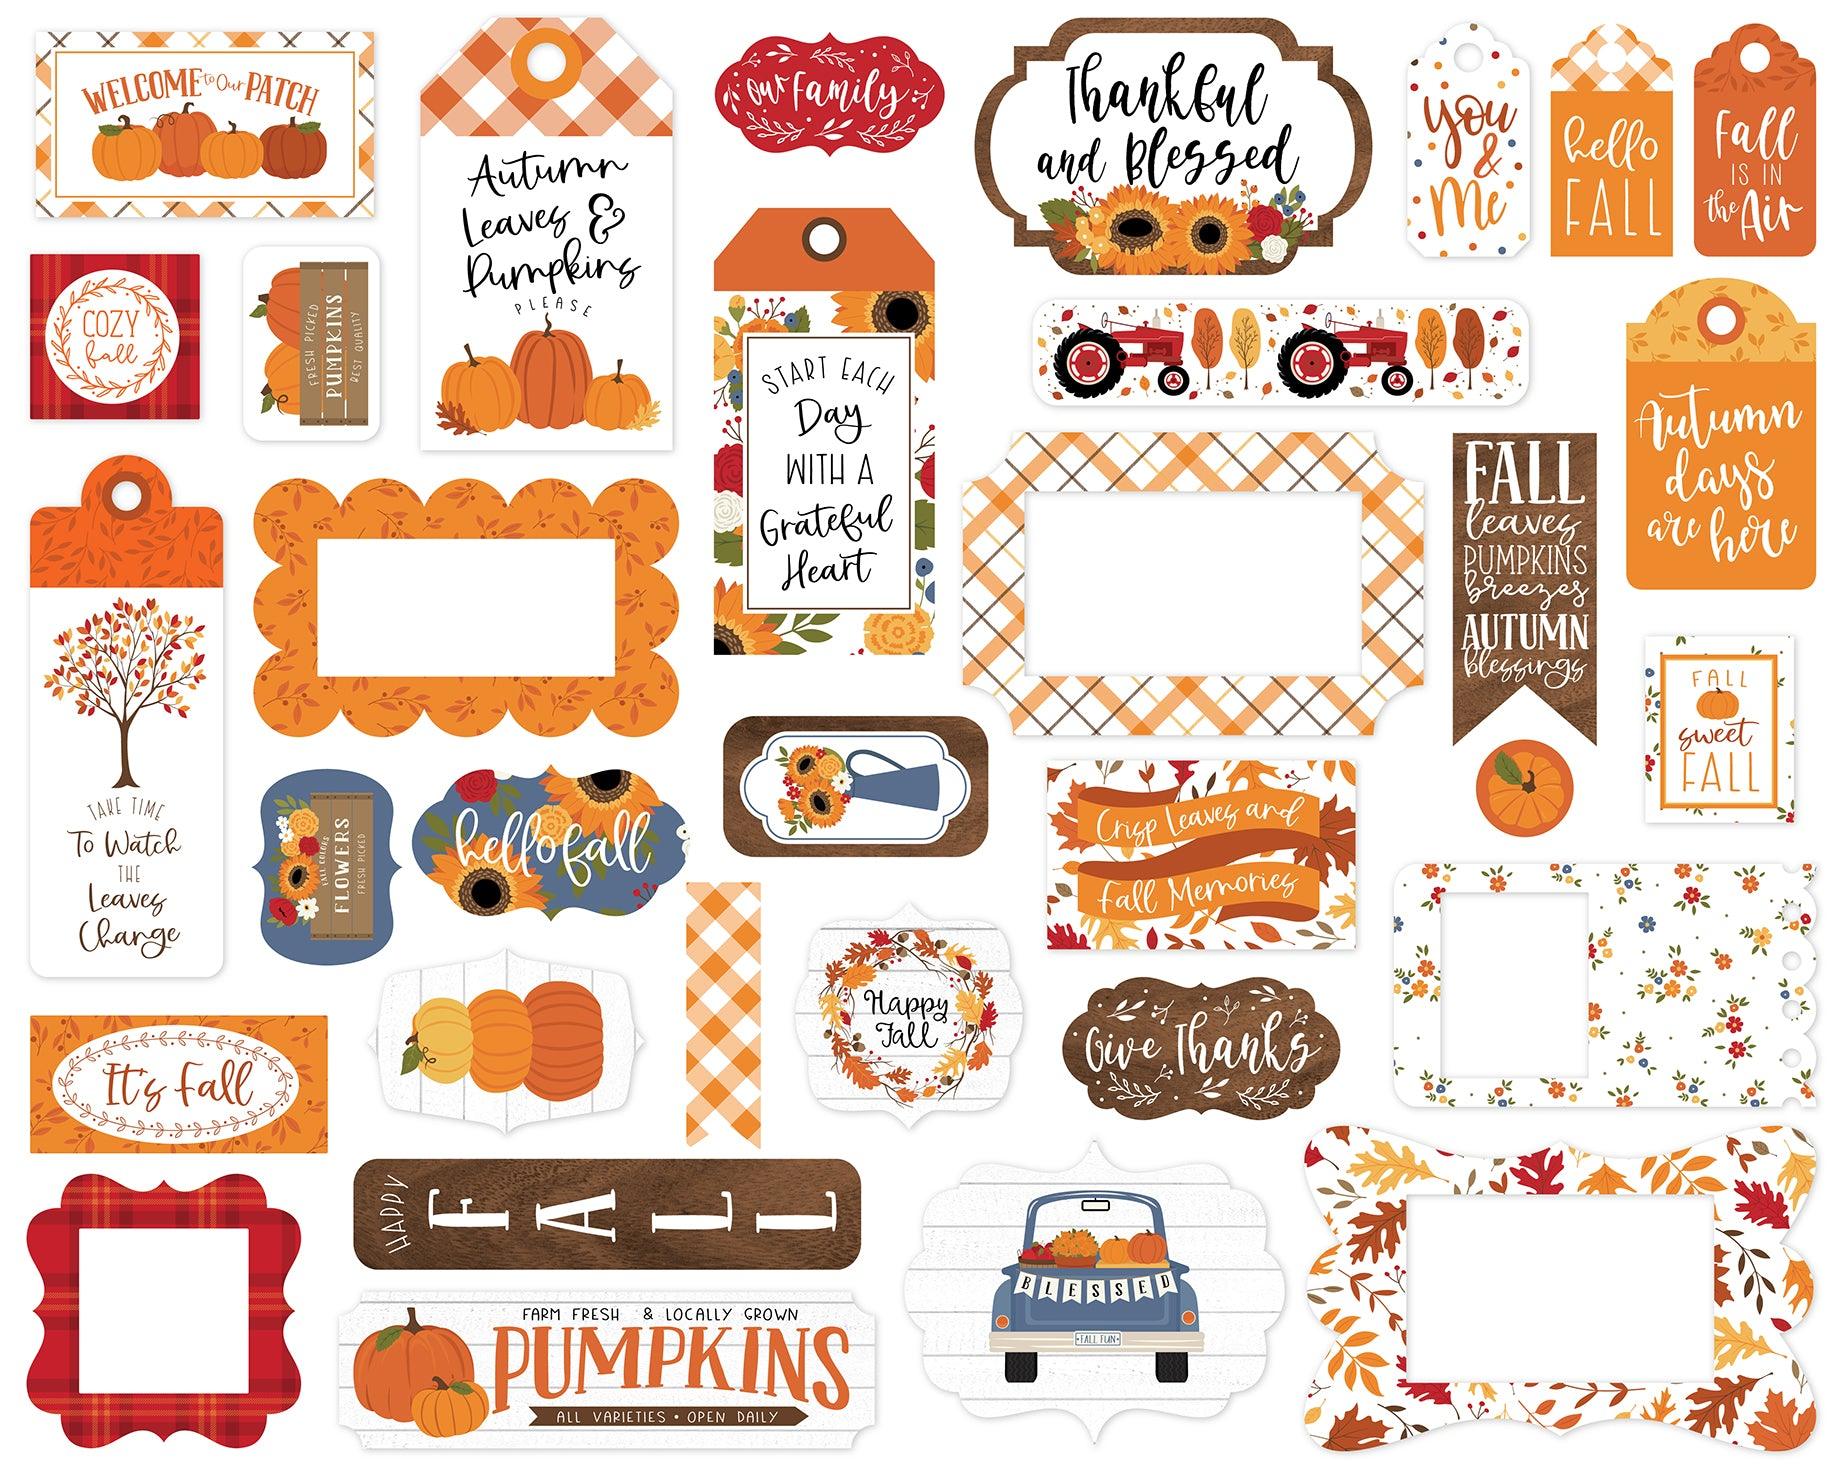 Fall Collection 5 x 5 Scrapbook Tags & Frames Die Cuts by Echo Park Paper - Scrapbook Supply Companies